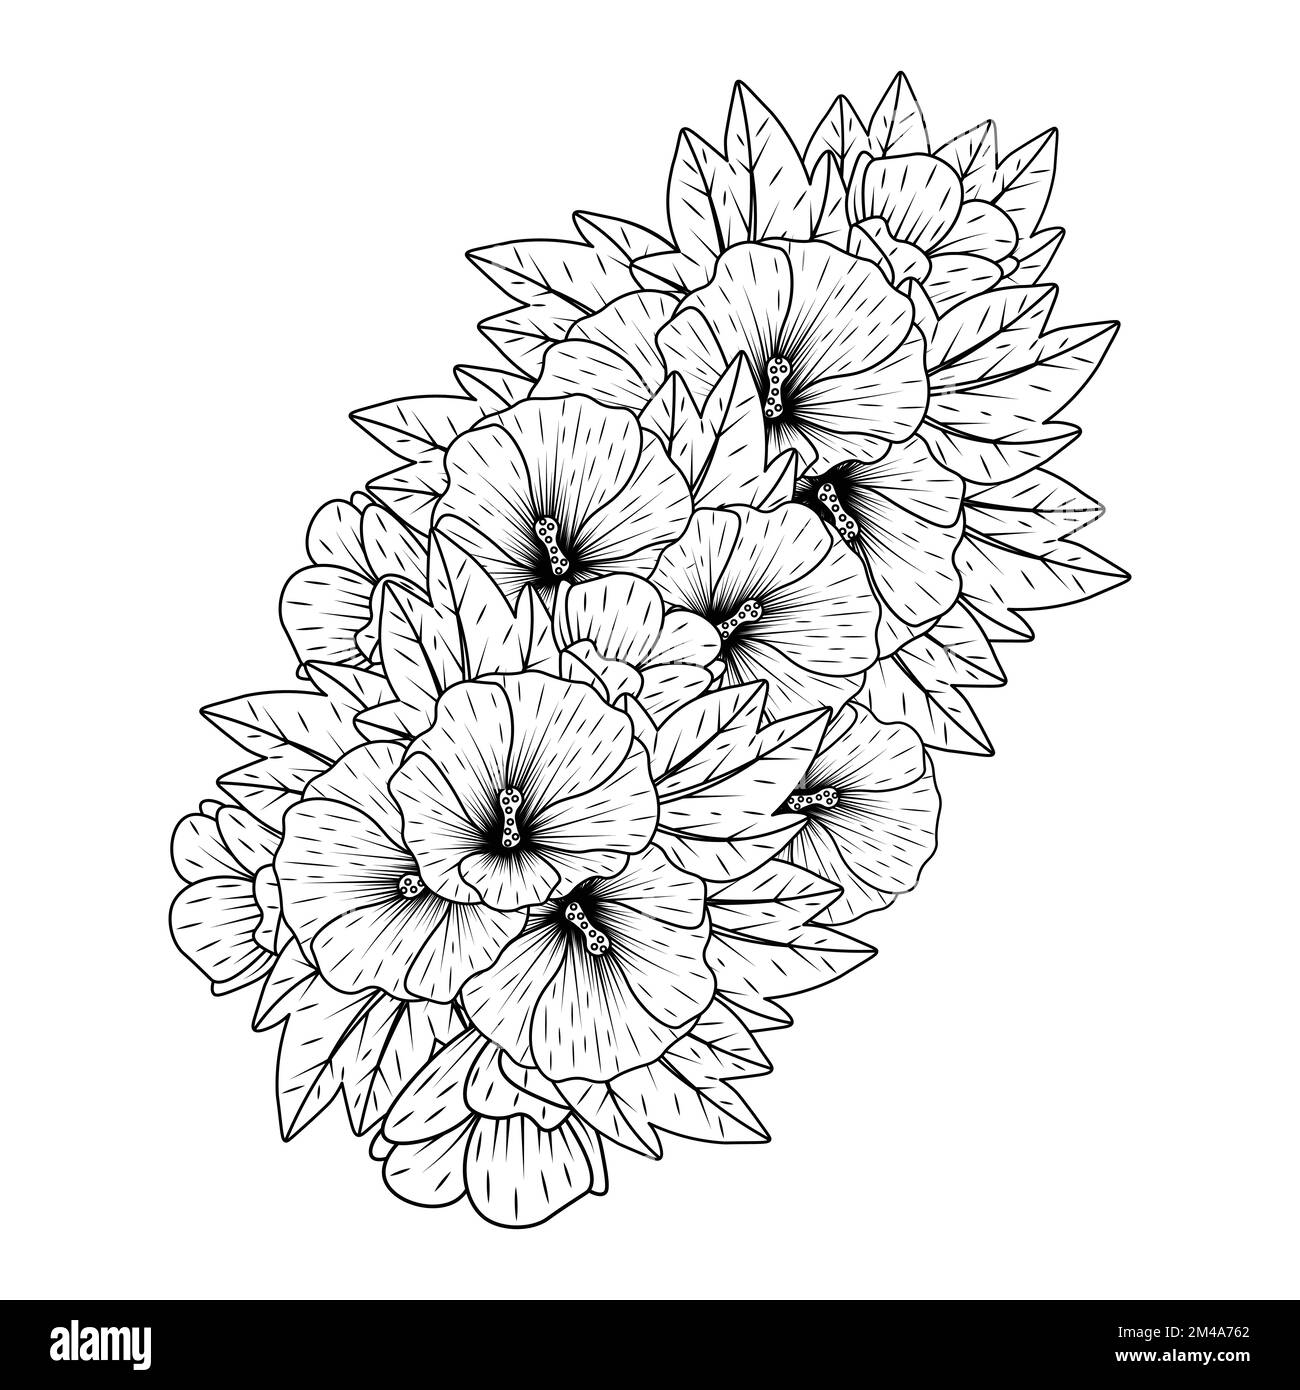 hollyhock flower doodle clip art coloring page with decorative flower background design illustration Stock Vector